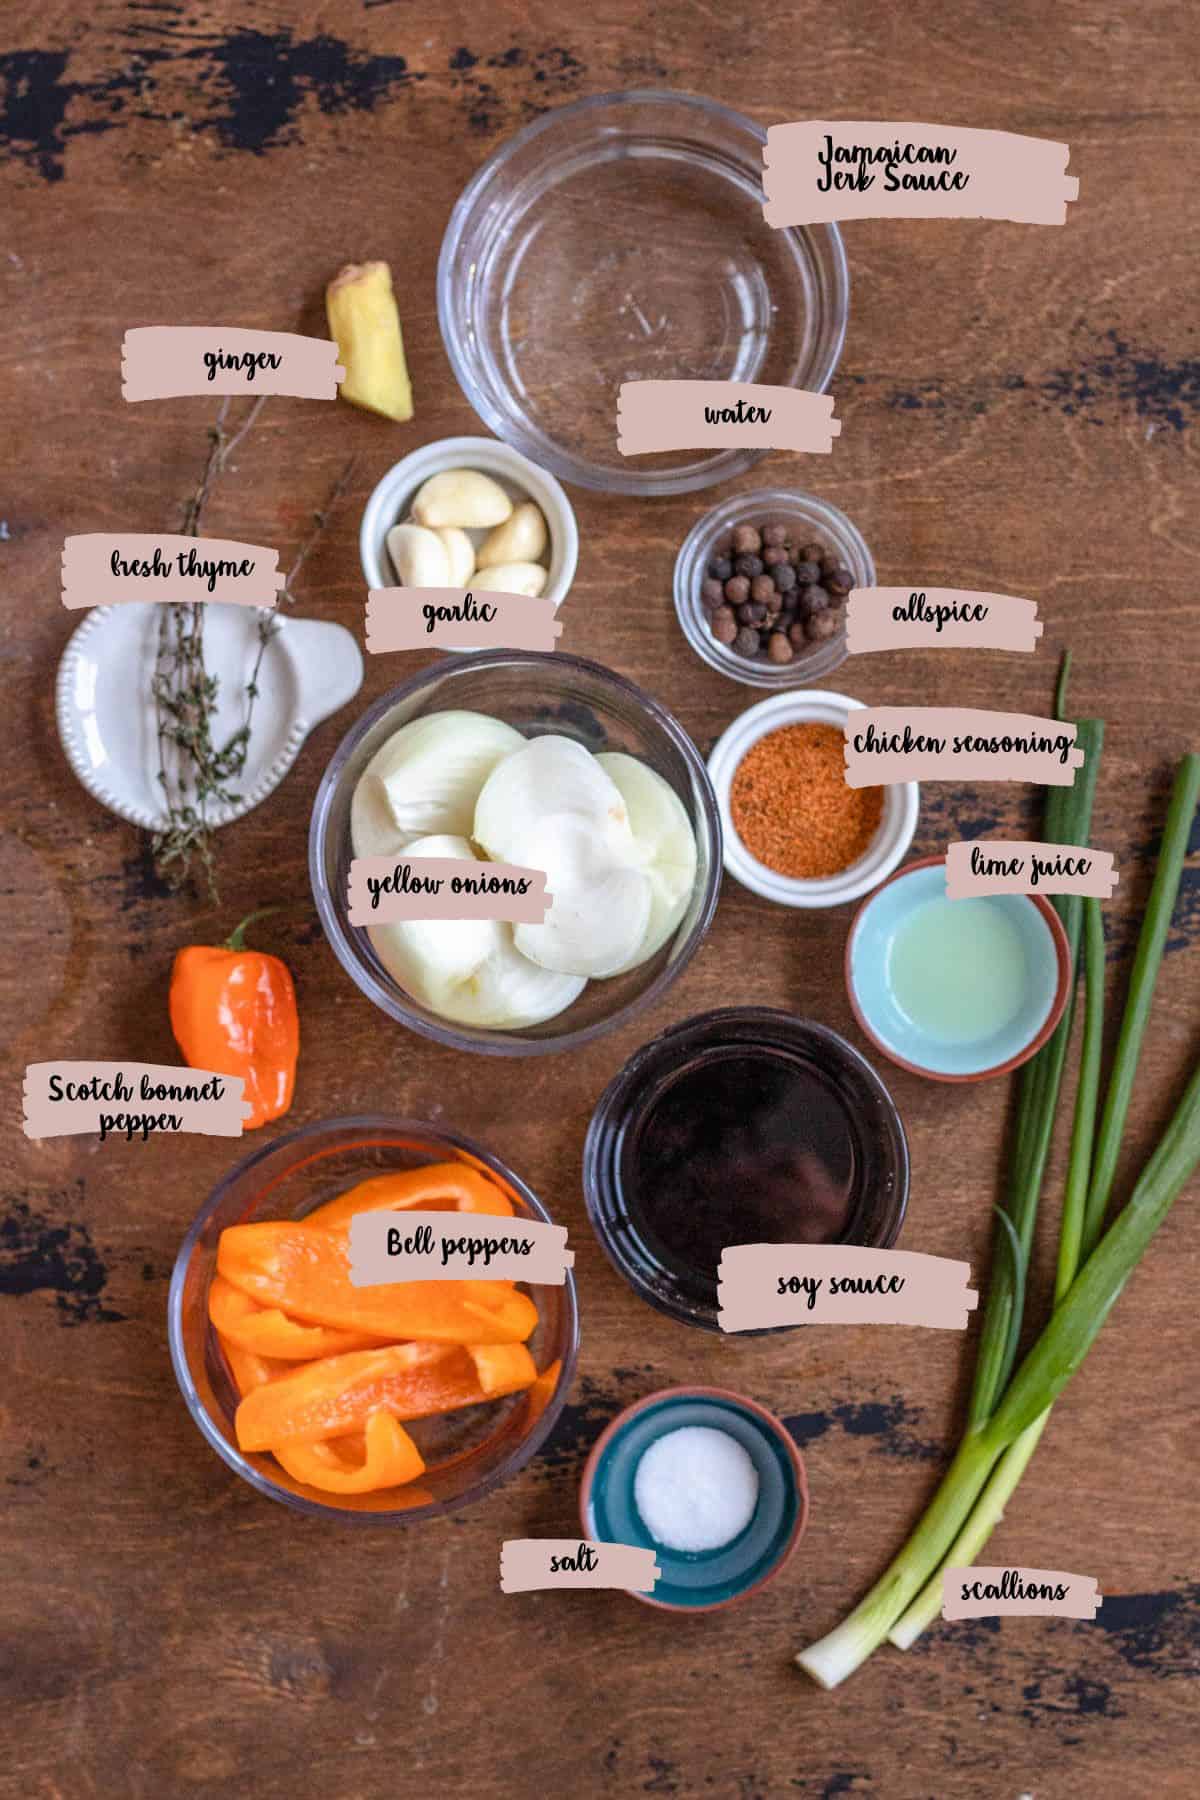 Ingredients shown that are needed to prepared Jamaican jerk sauce. 